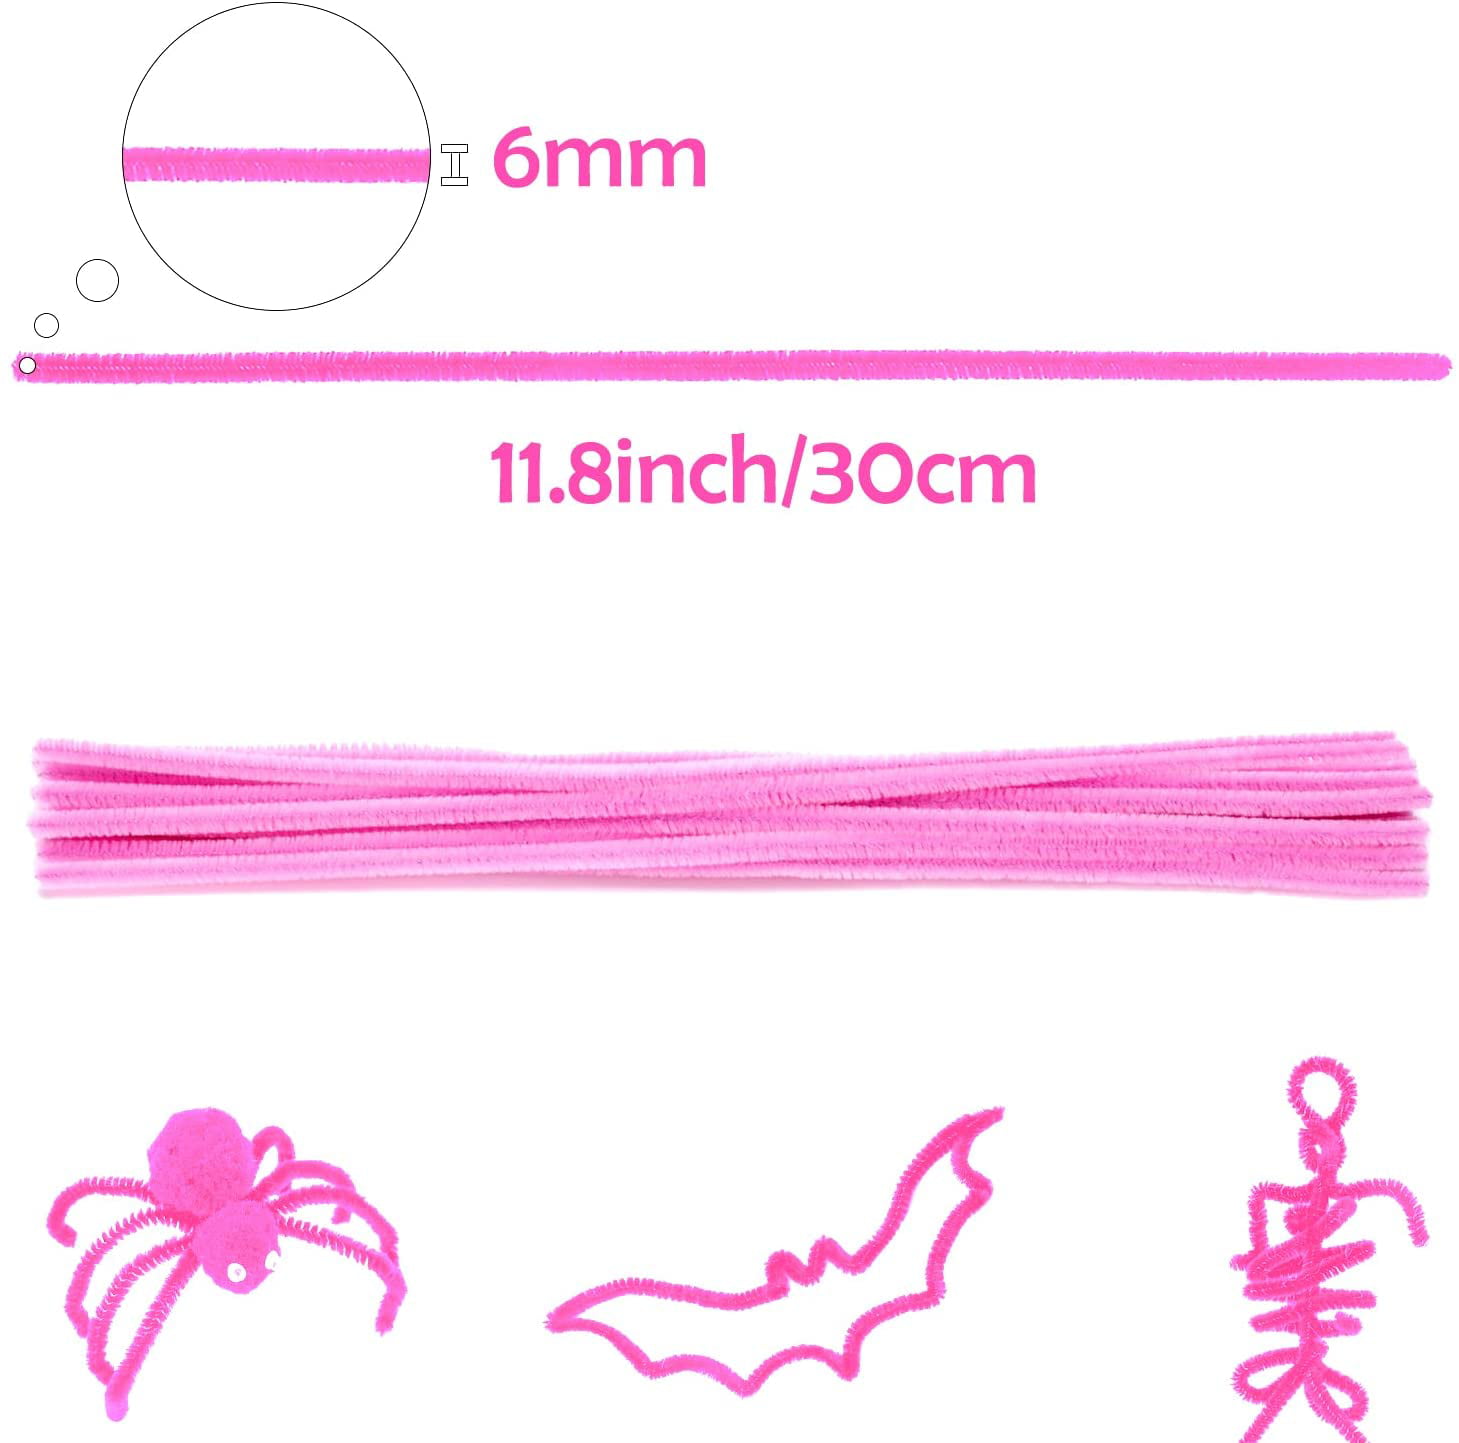 Caryko Super Fuzzy Chenille Stems Pipe Cleaners, Pack of 100 (Pink)